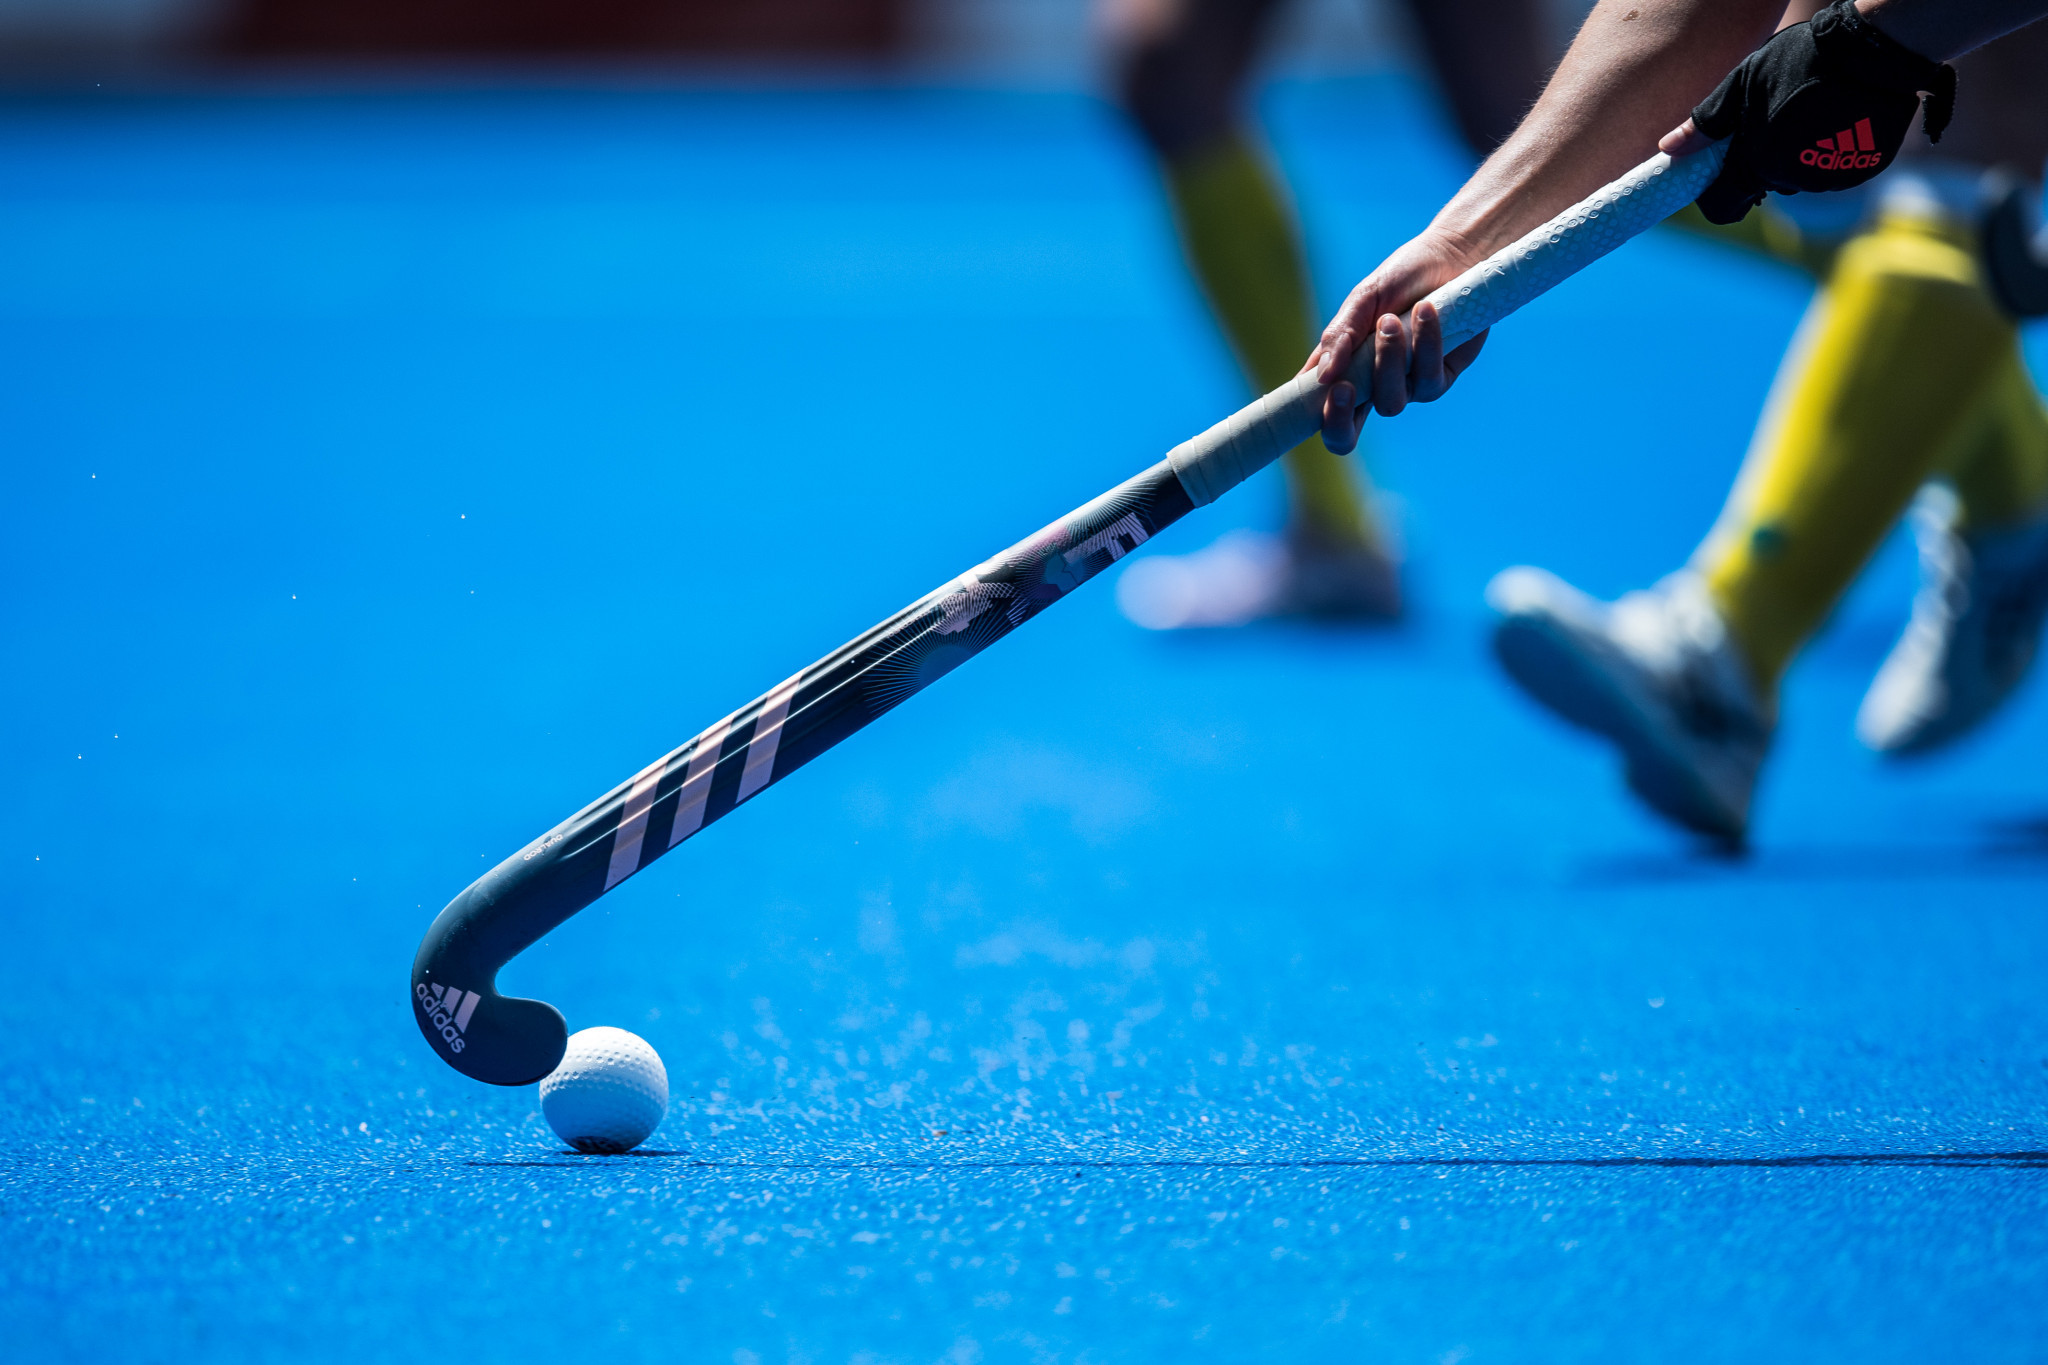 Santiago 2023 hockey venue becomes first site cleared for athlete use